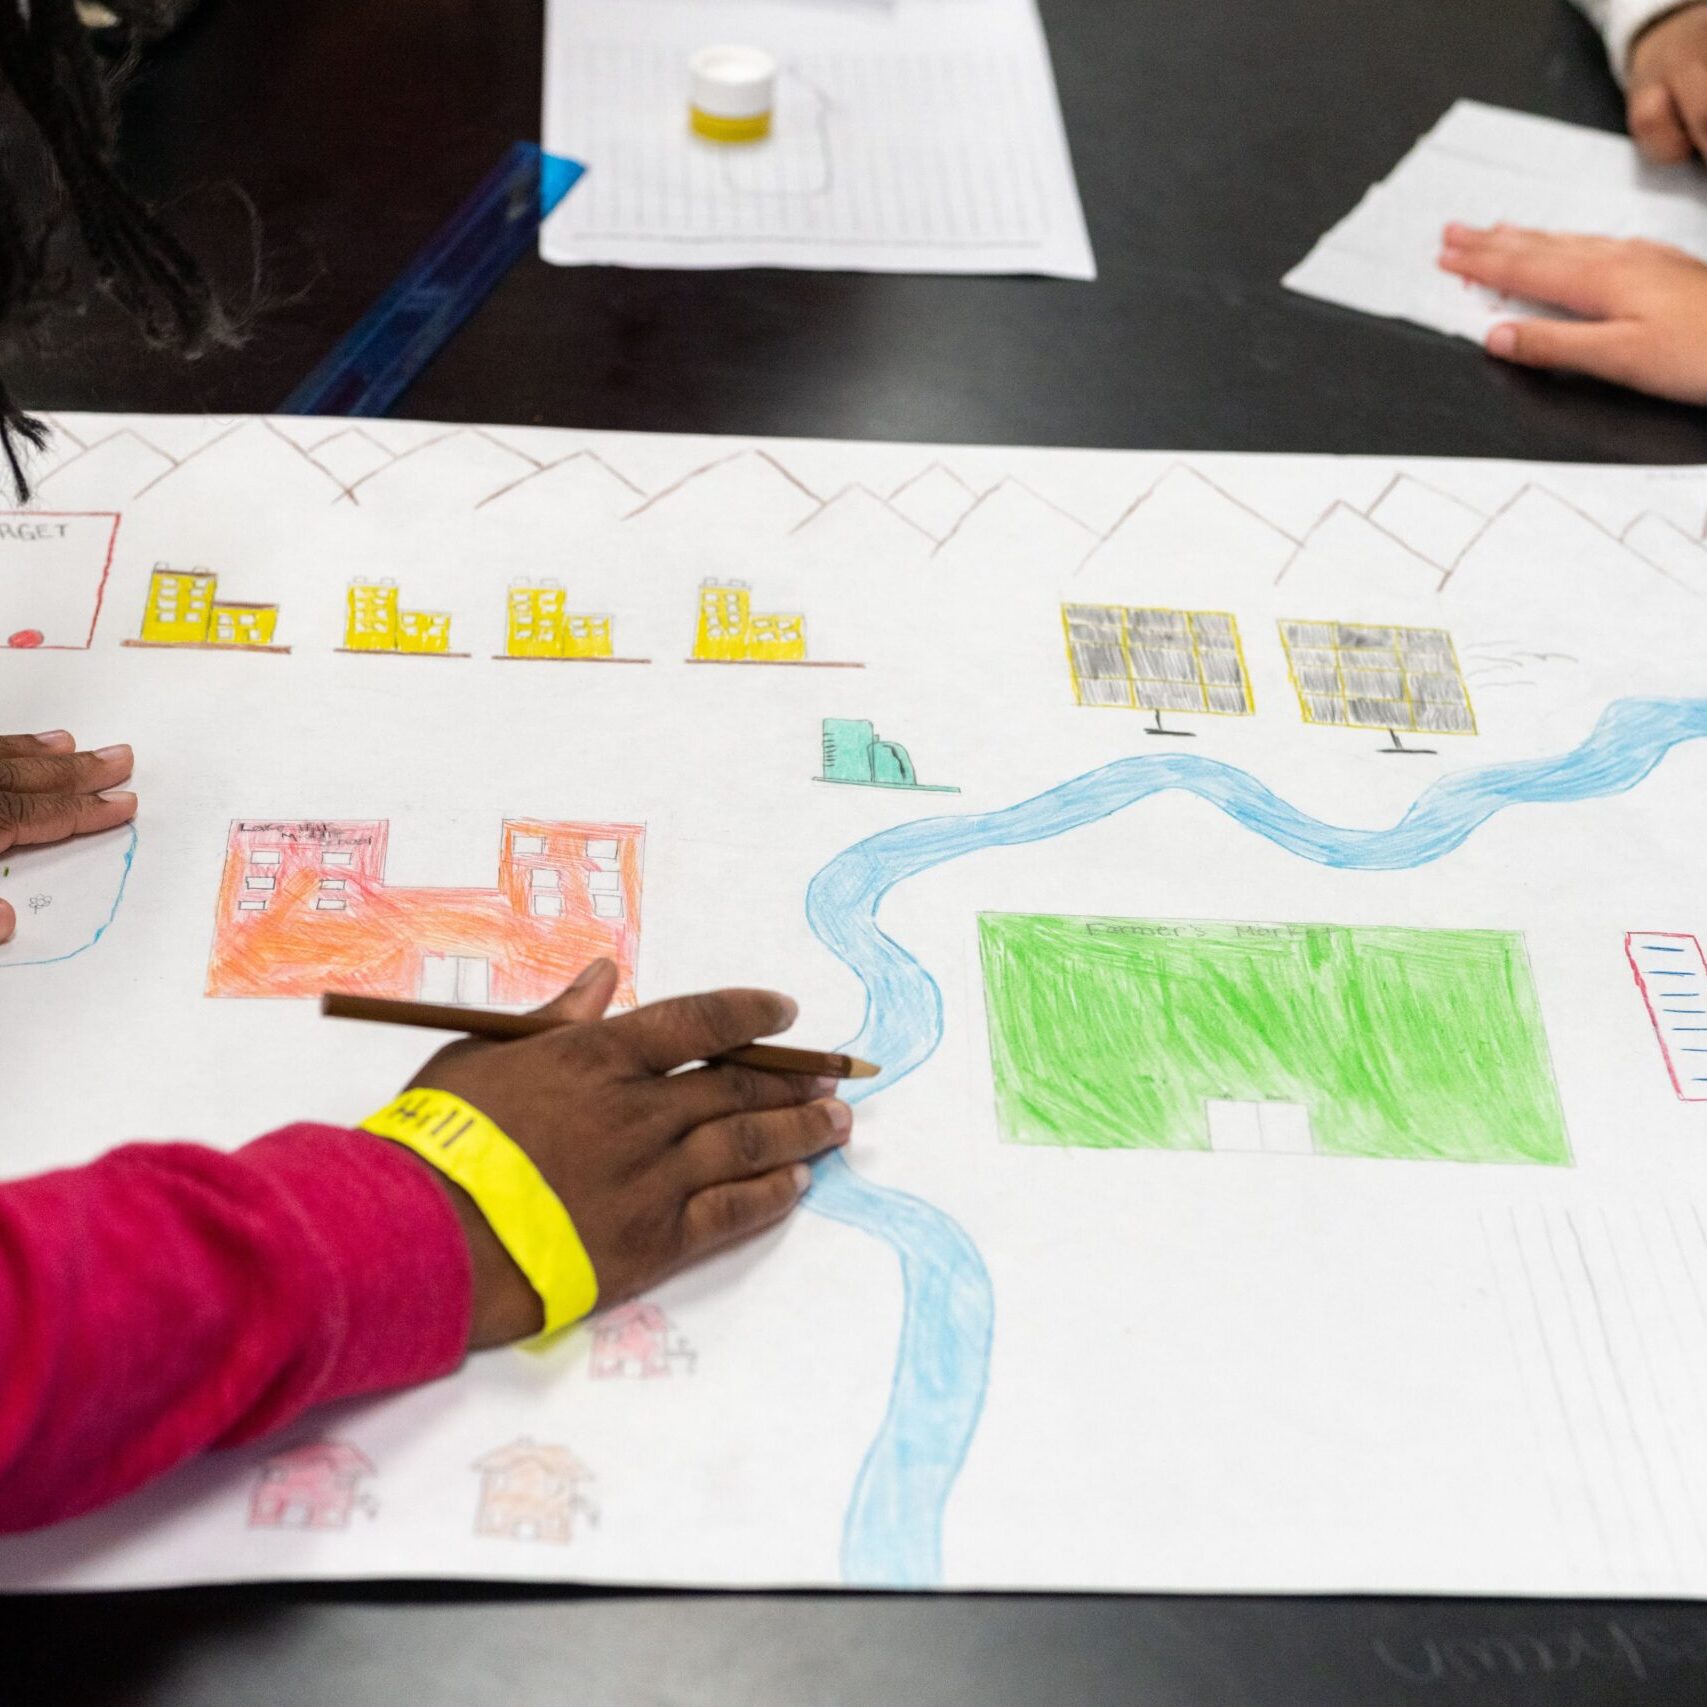 Students draw a city on a large posterboard